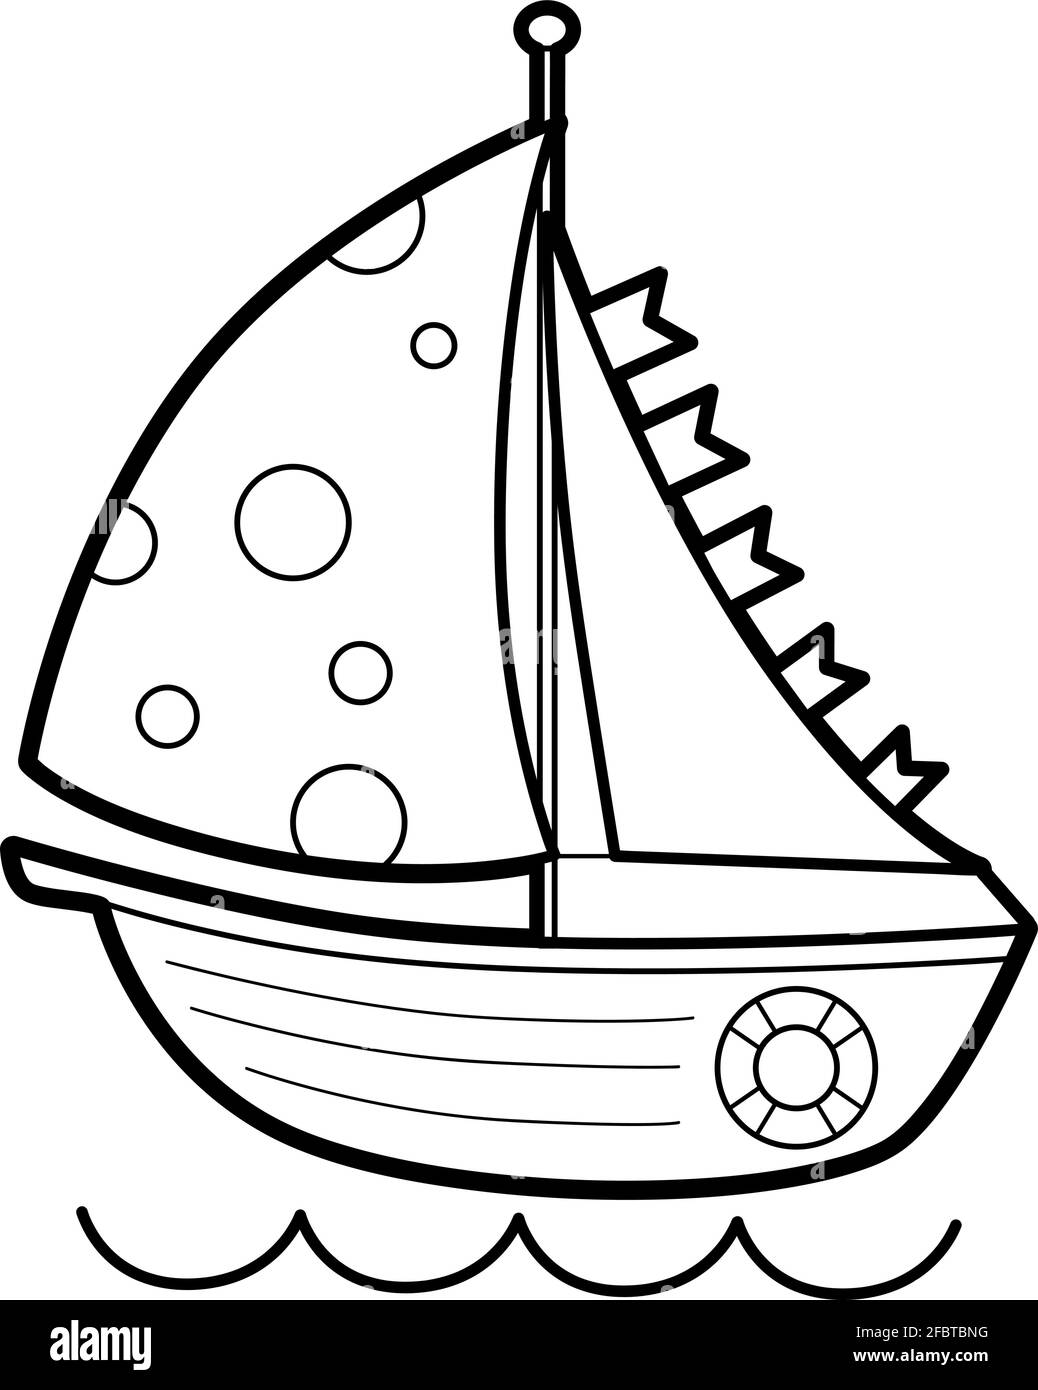 Coloring book or page for kids. boat black and white vector ...